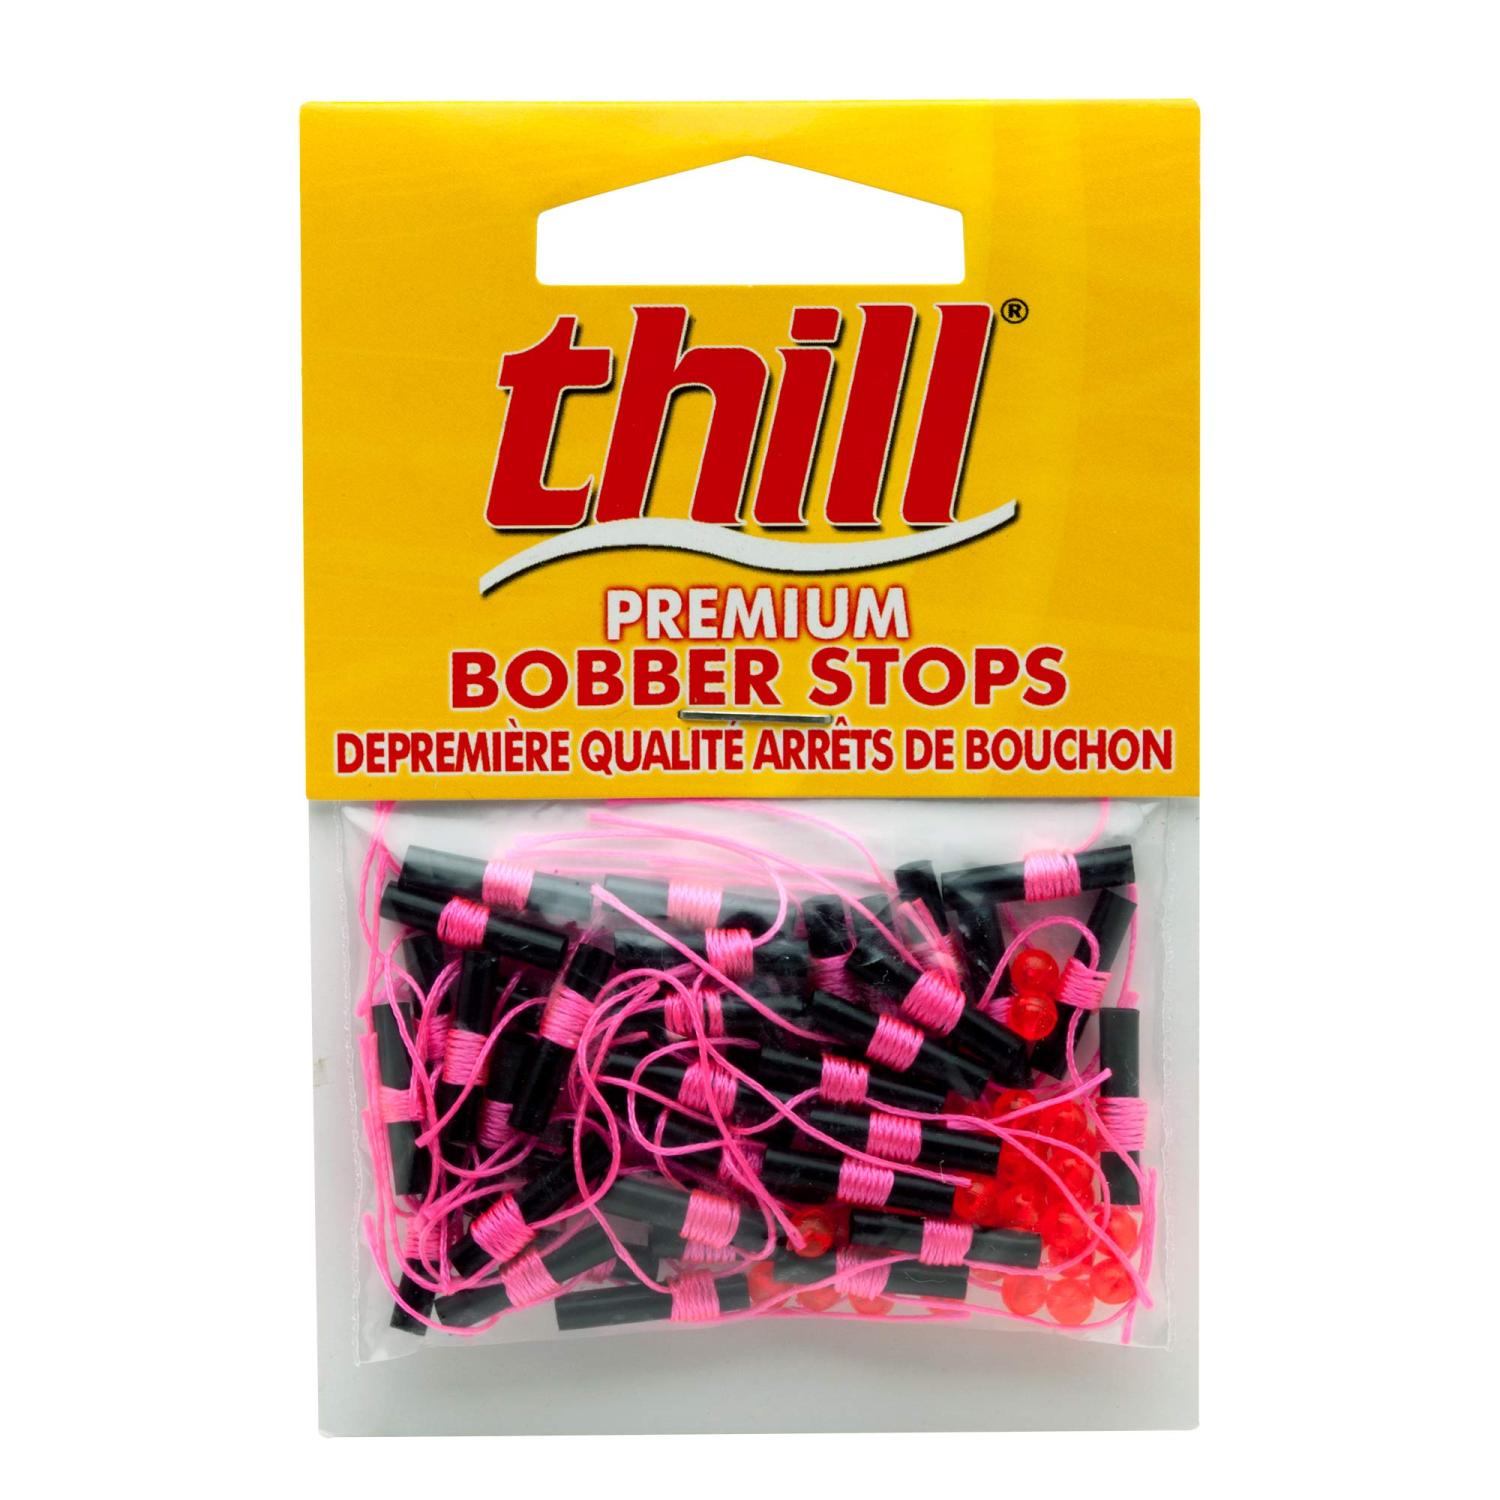 Thill Premium Bobber Stops for Fishing Floats, Fishing Gear and